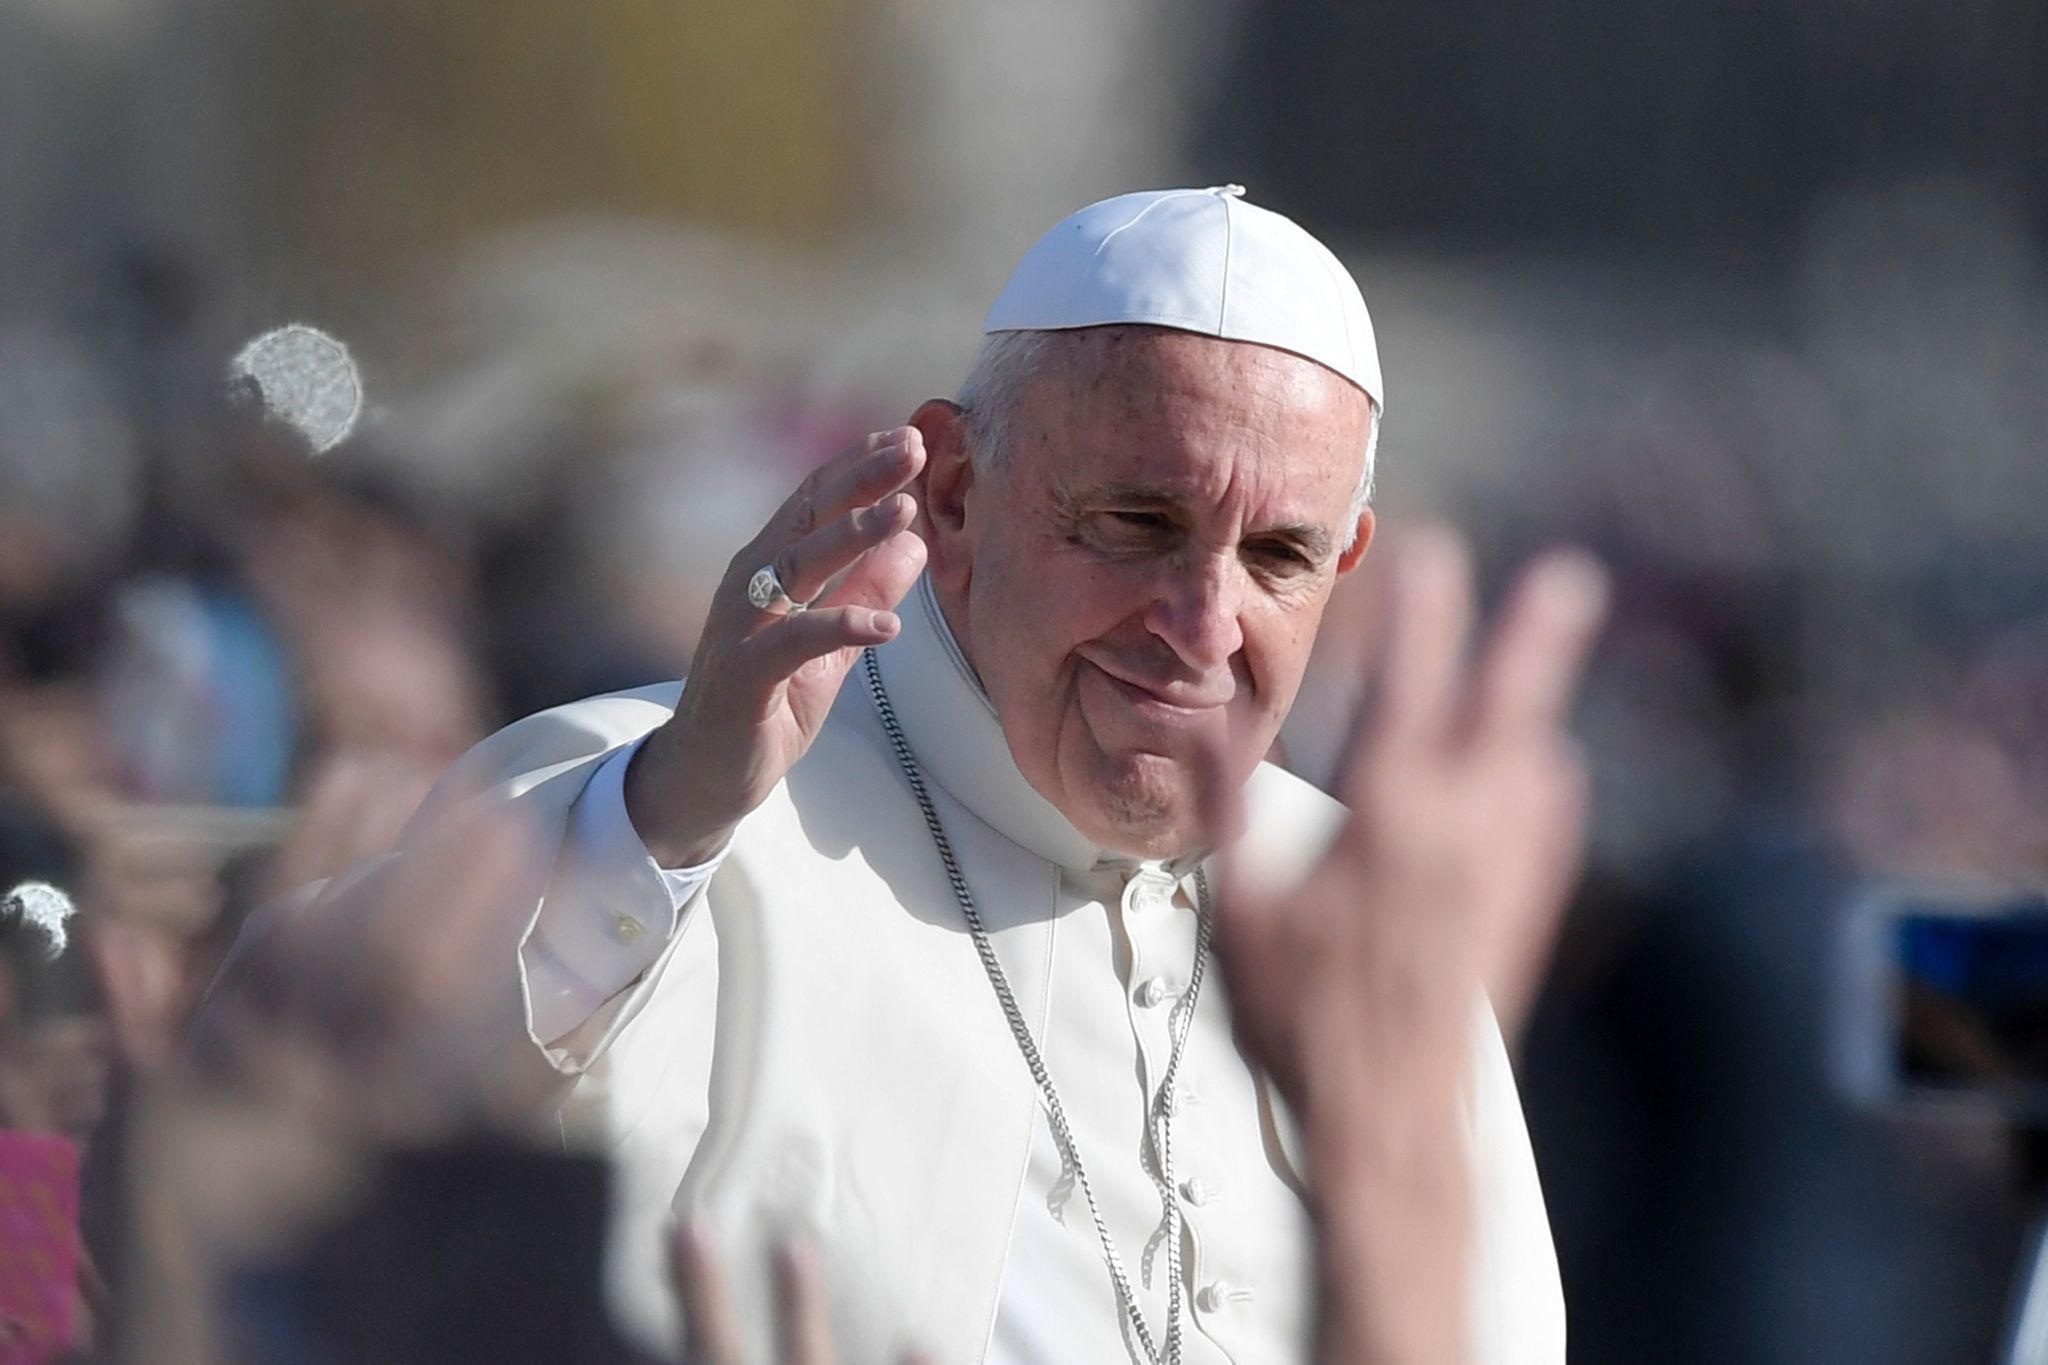 Pope extends permission for priests to absolve women who've had abortions and doctors who provided them